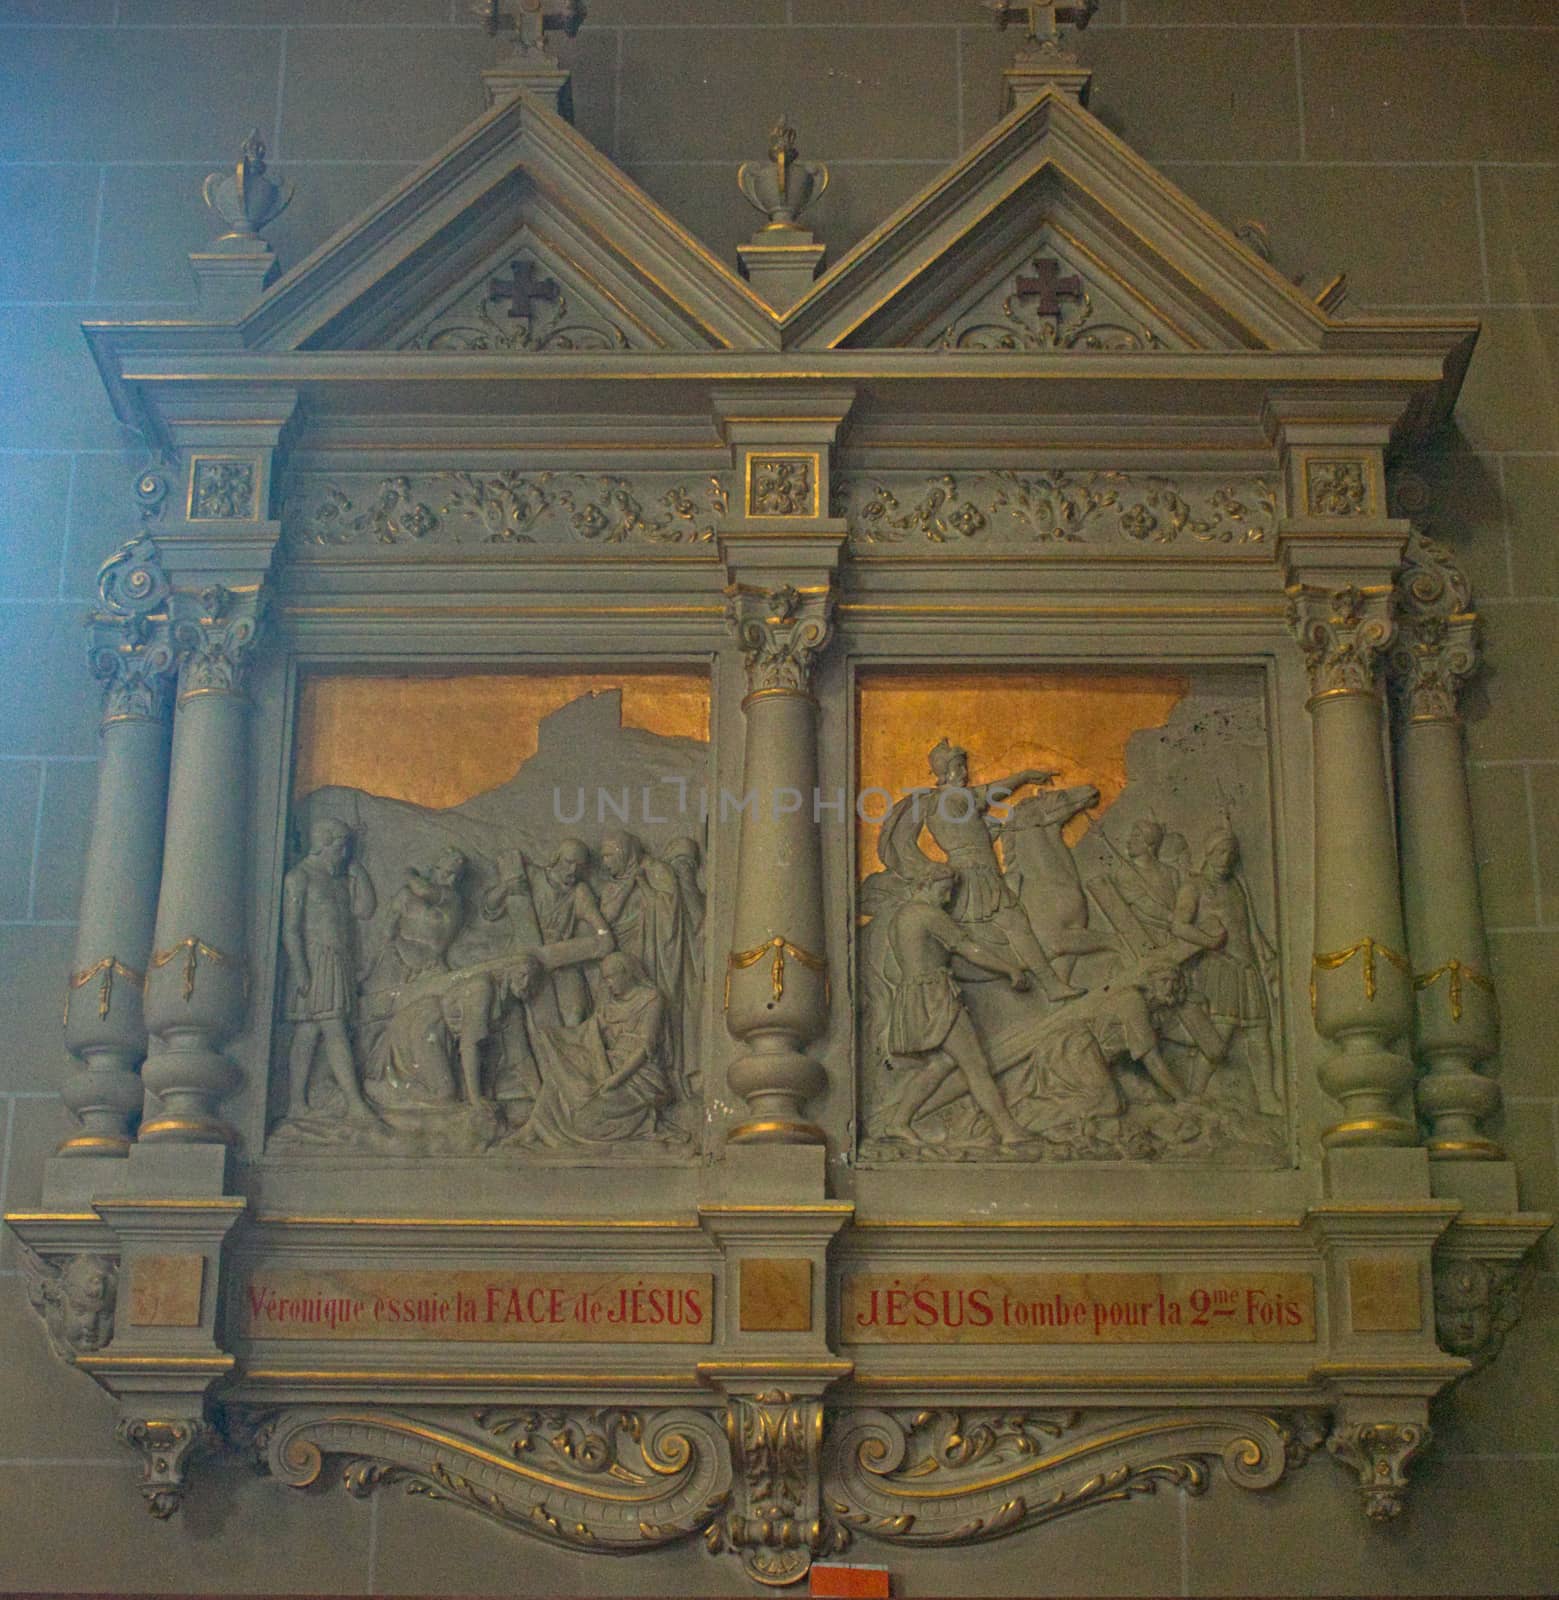 Altar with statues of saints in Catholic cathedral at Avranches, France